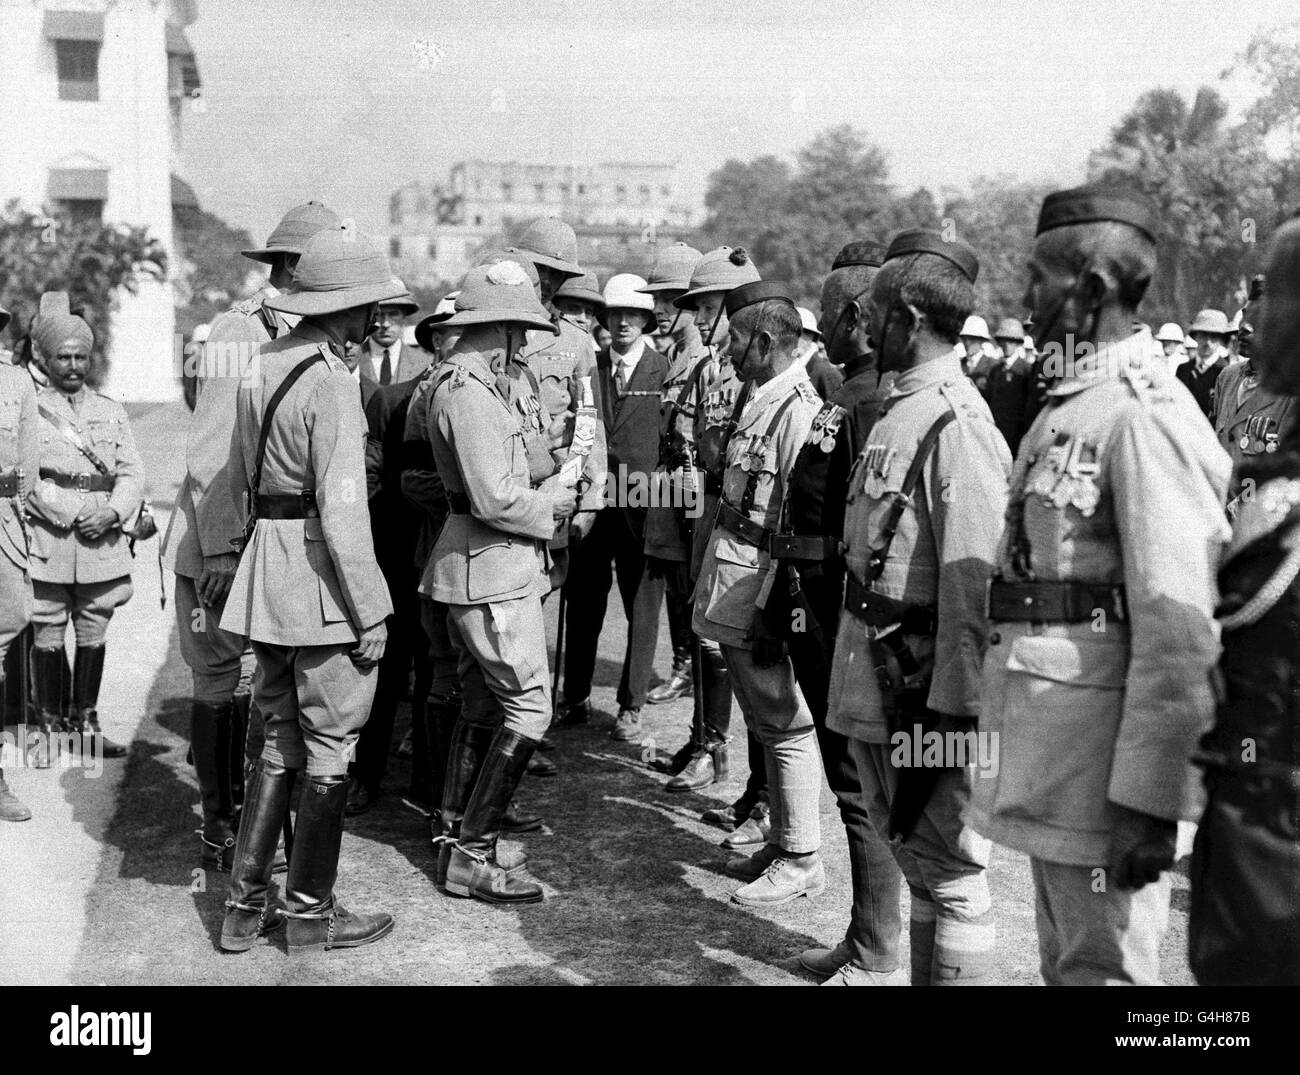 PRINCE OF WALES MEETS GURKHA OFFICERS: 1922 Stock Photo